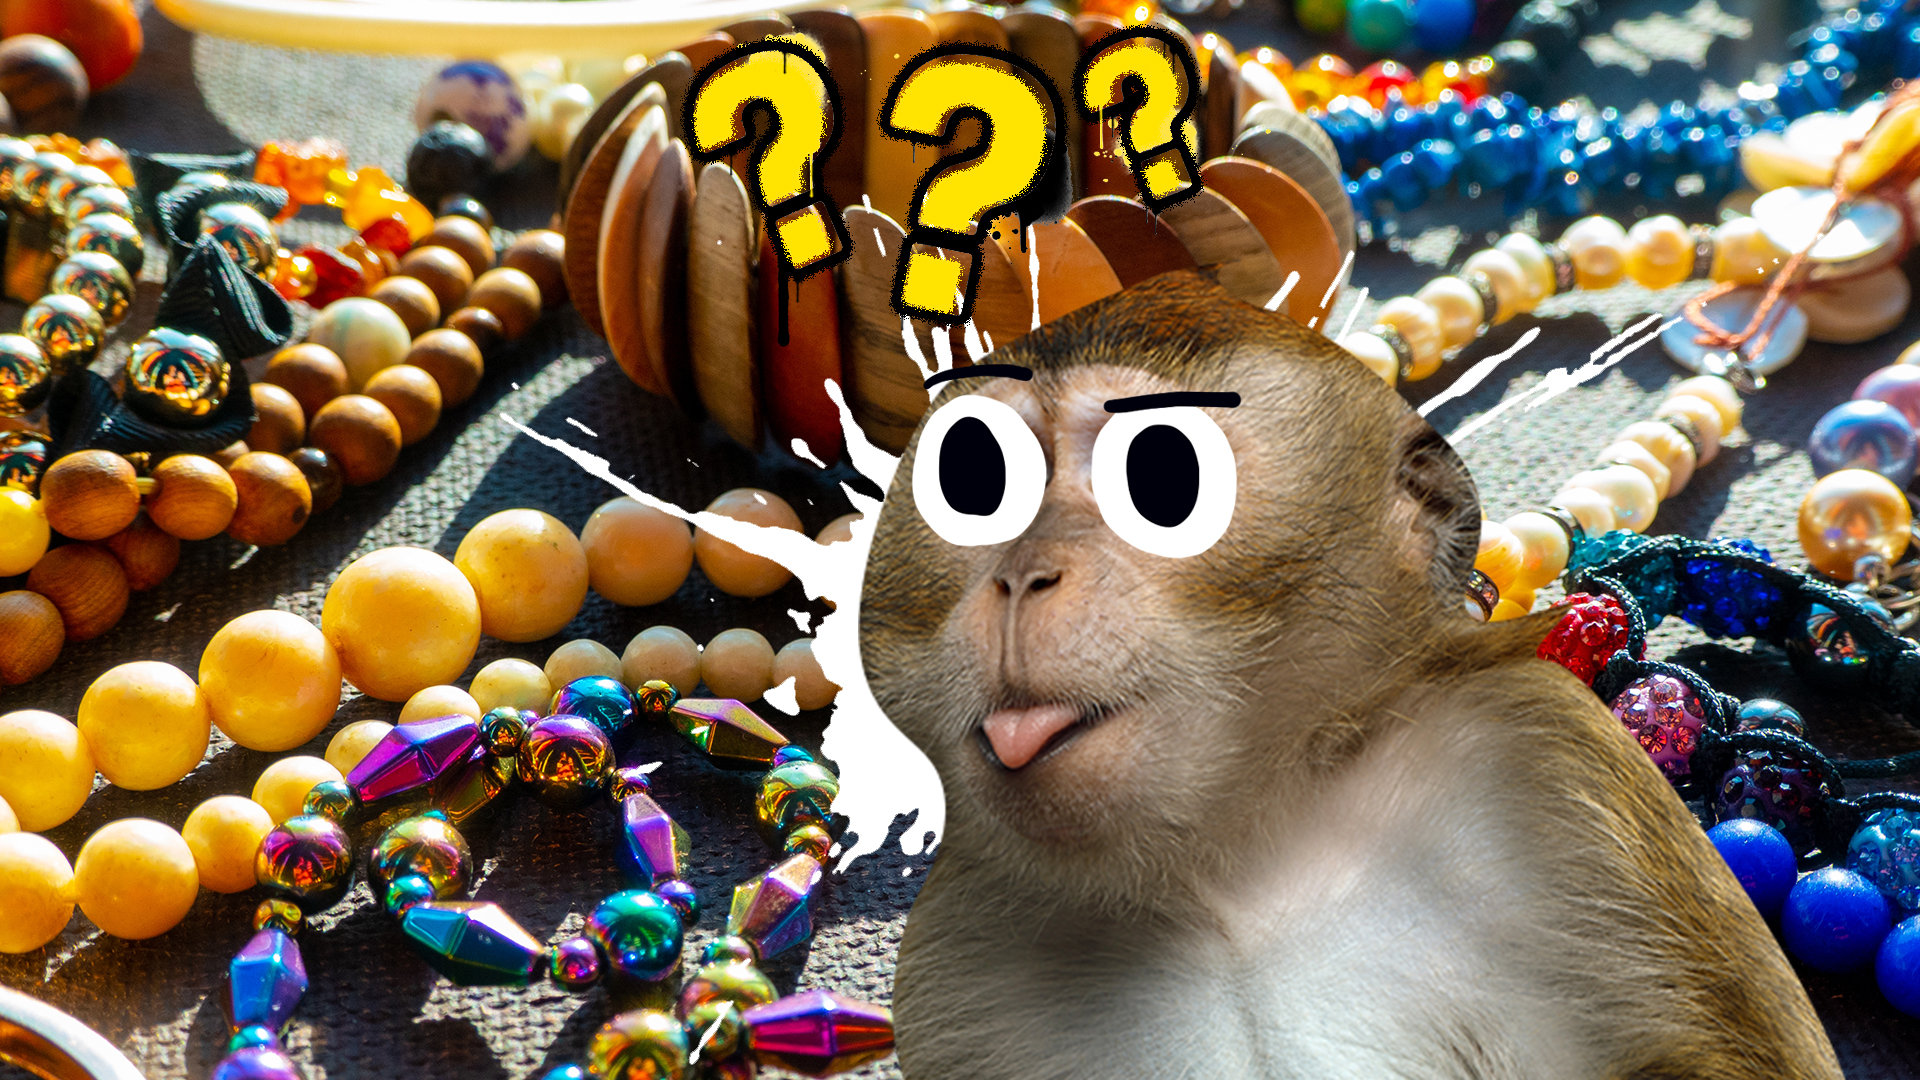 A monkey surrounded by necklaces